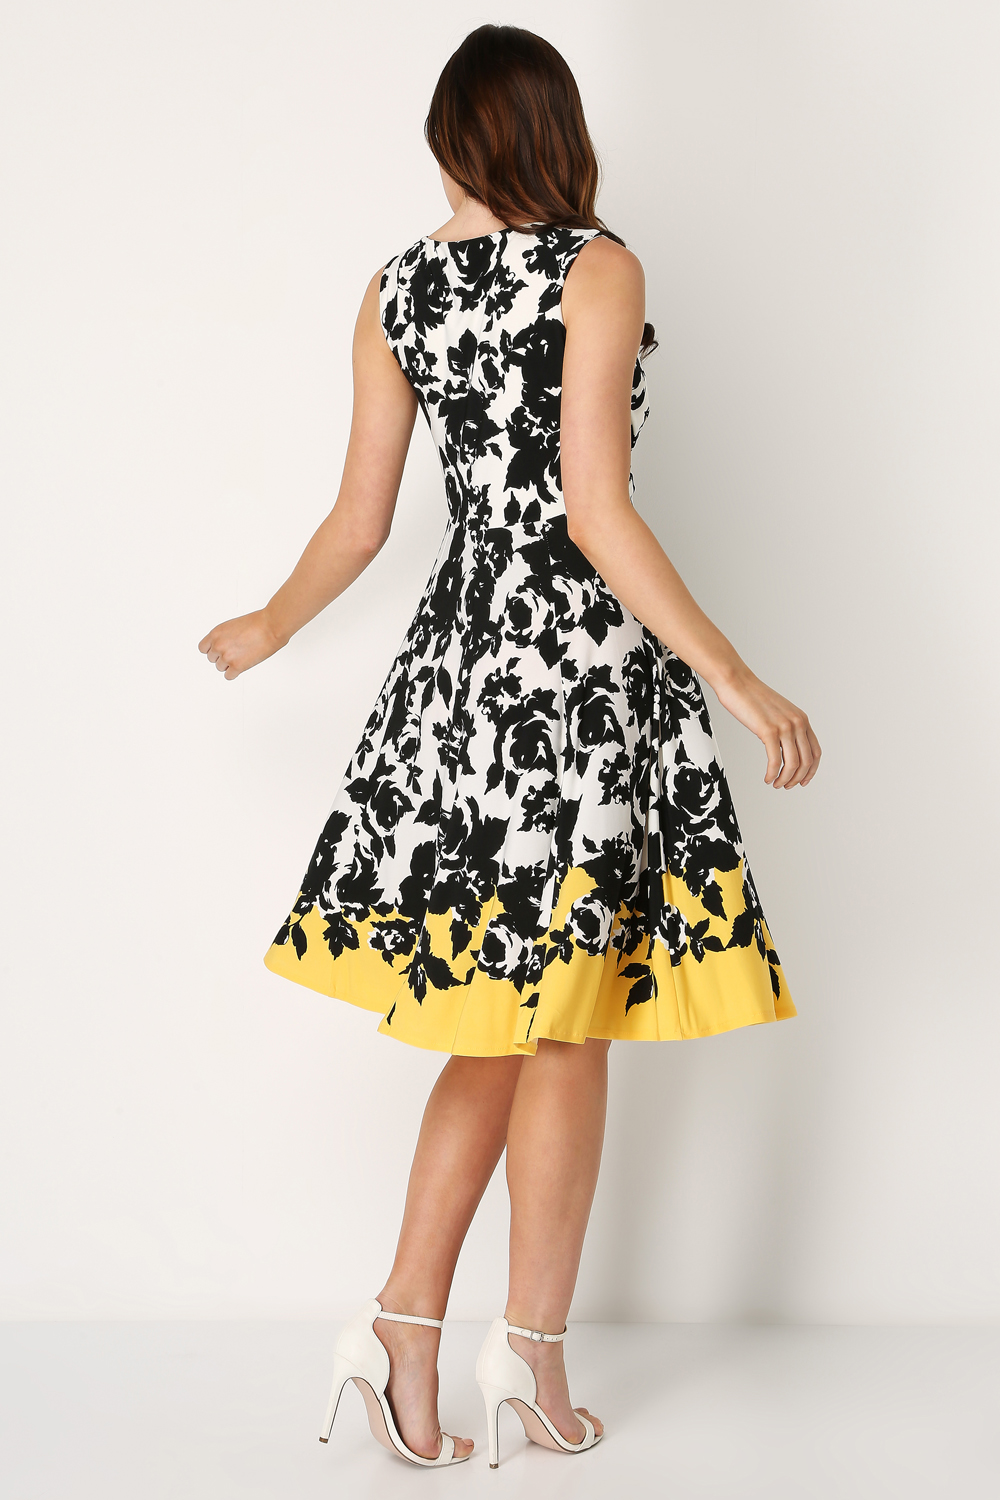 Yellow Fit and Flare Contrast Floral Dress, Image 4 of 4